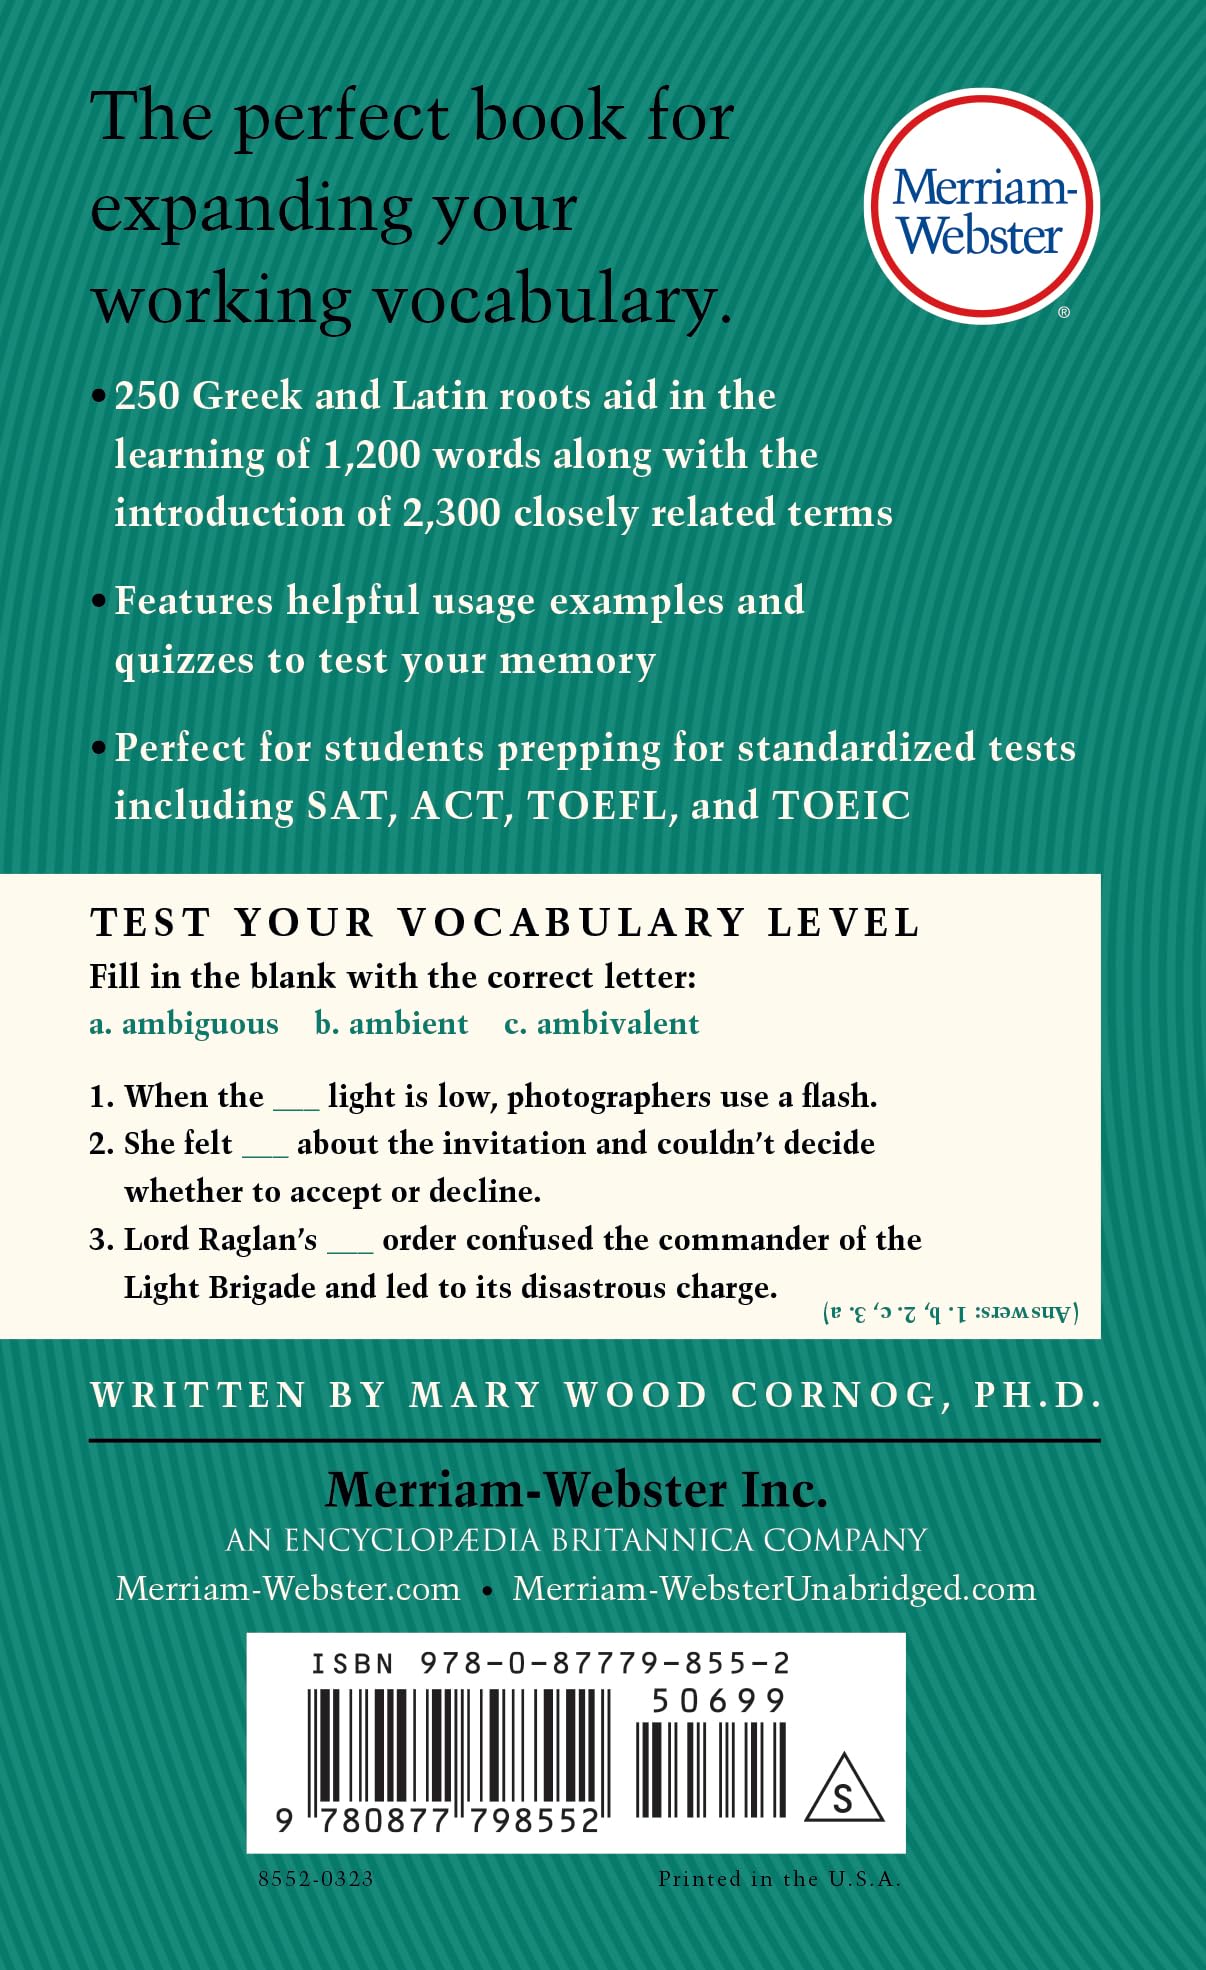 Merriam-Webster’s Vocabulary Builder | Perfect for prepping for SAT, ACT, TOEFL, & TOEIC